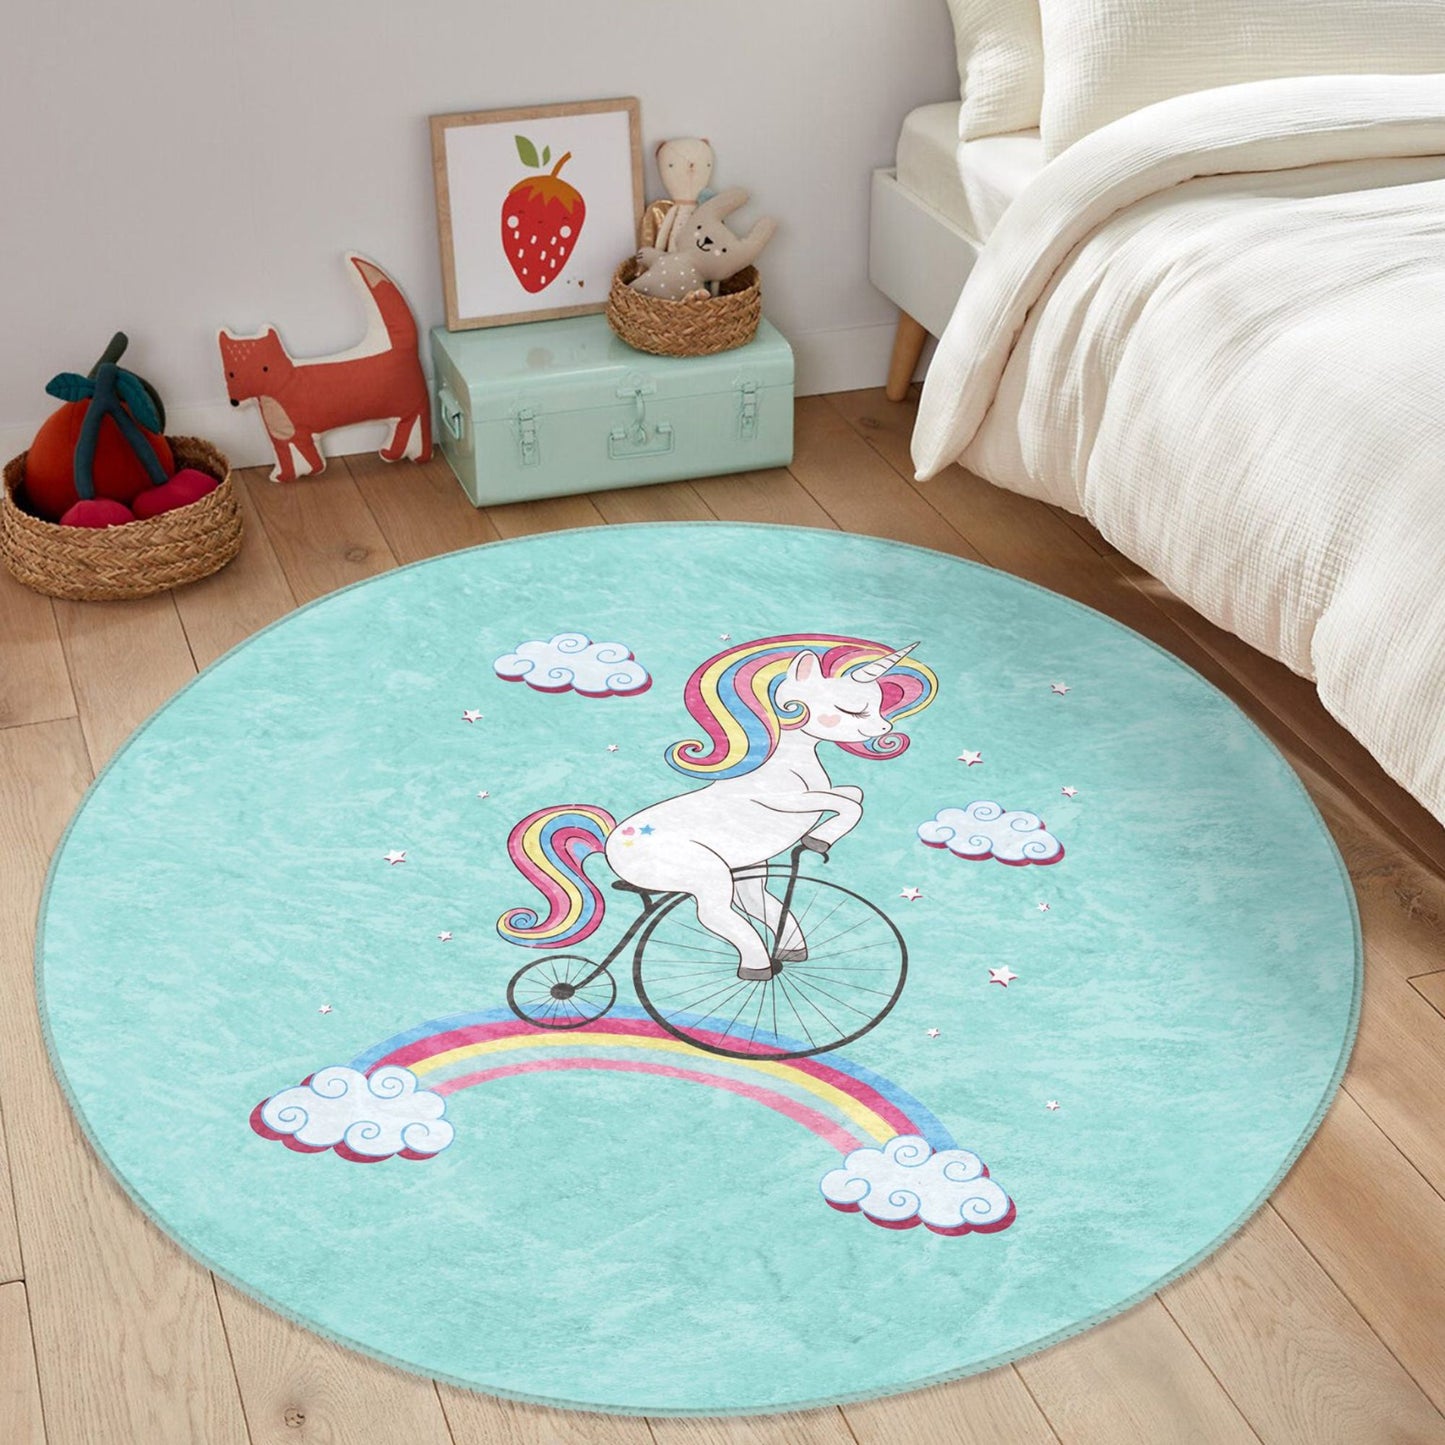 Easy-to-Clean Unicorn and Rainbow Rug